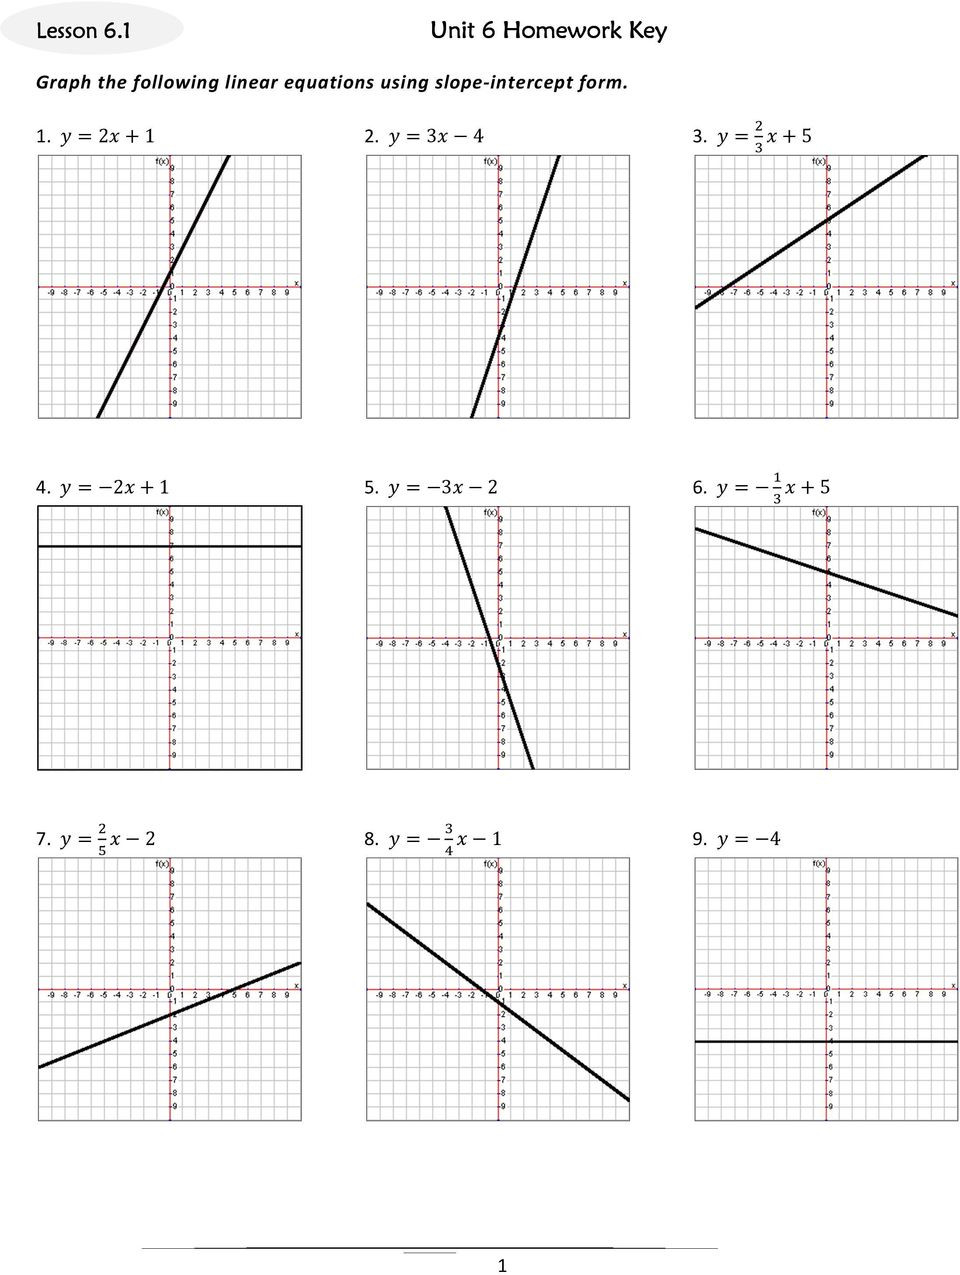 Graphing Linear Equations Practice Worksheet Graph the Following Linear Equations Using Slope Intercept